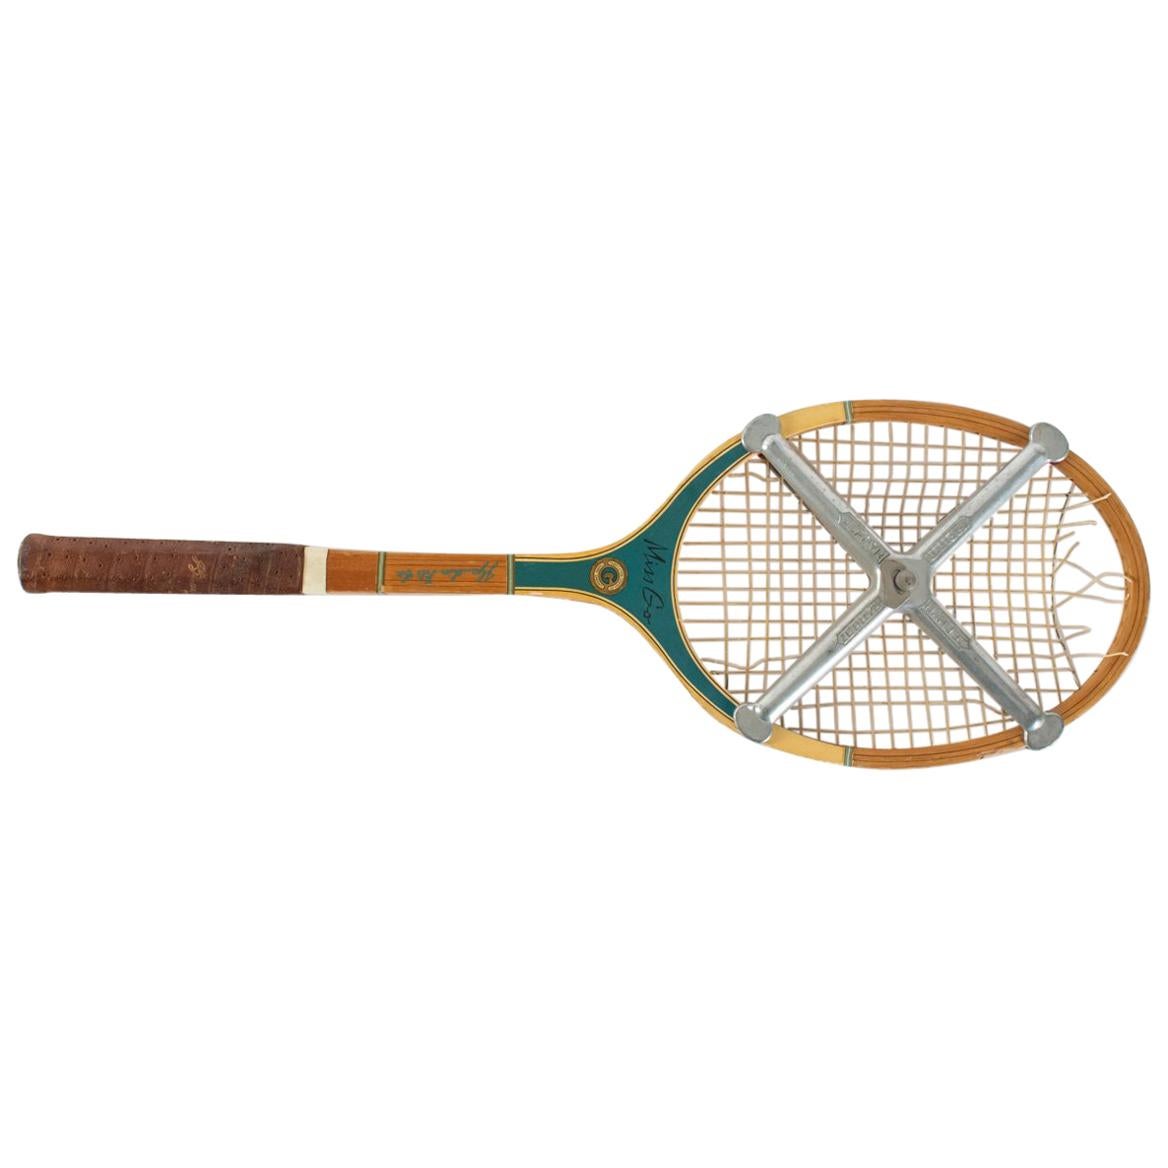 Tennis Racket, Miss Go, Pro, Middle of the 20th Century. For Sale